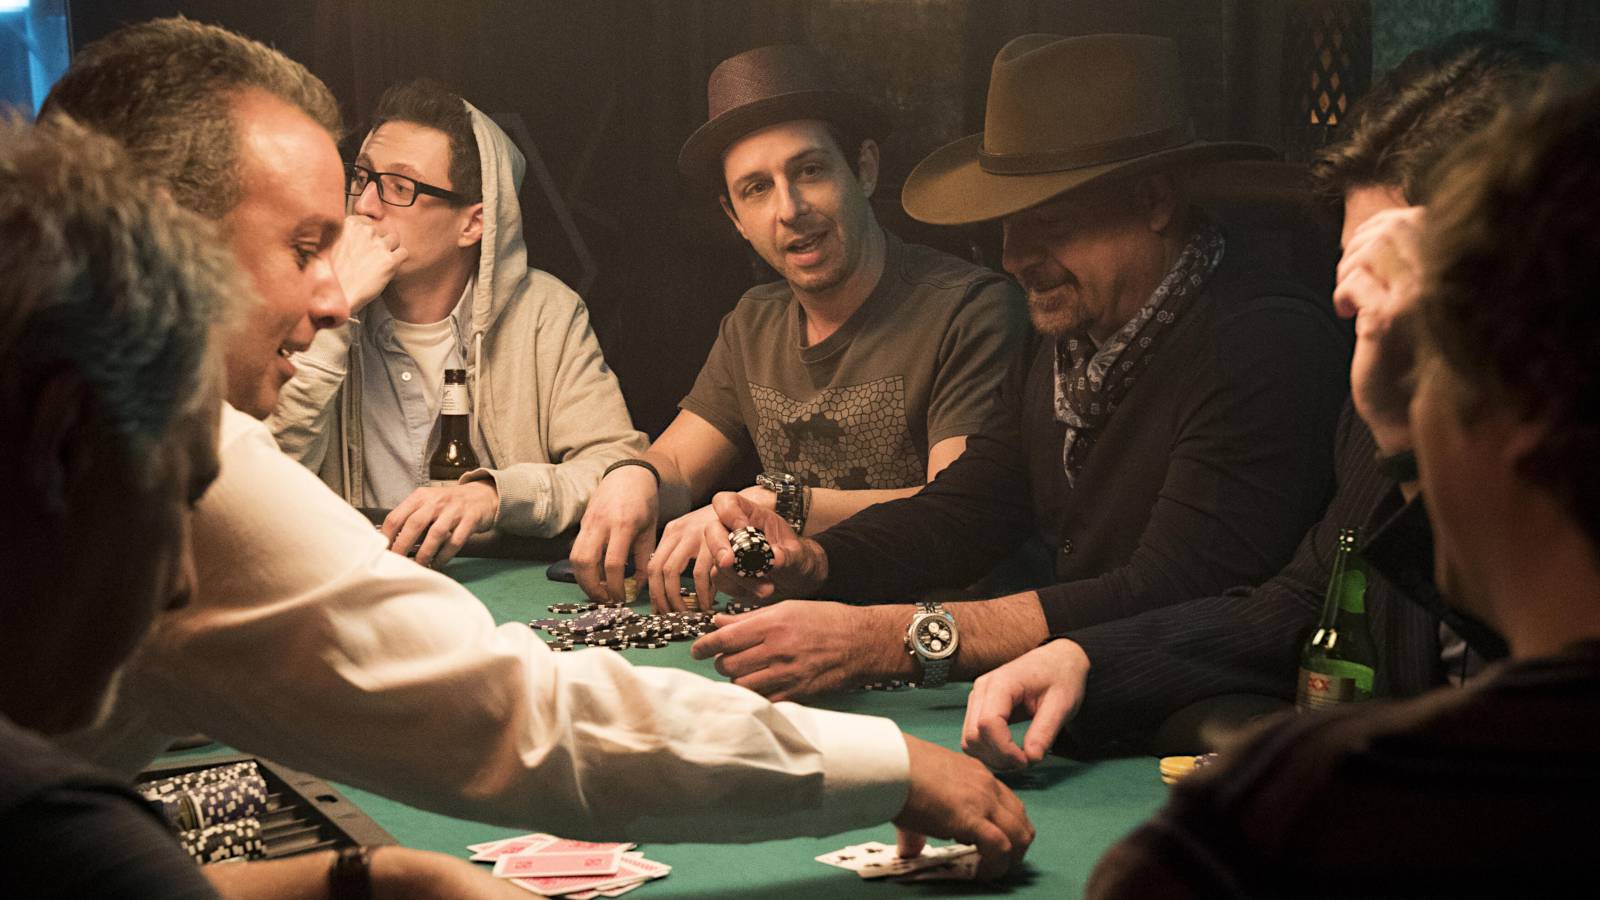 The 15 Best Movies About Gambling and Casinos, Ranked